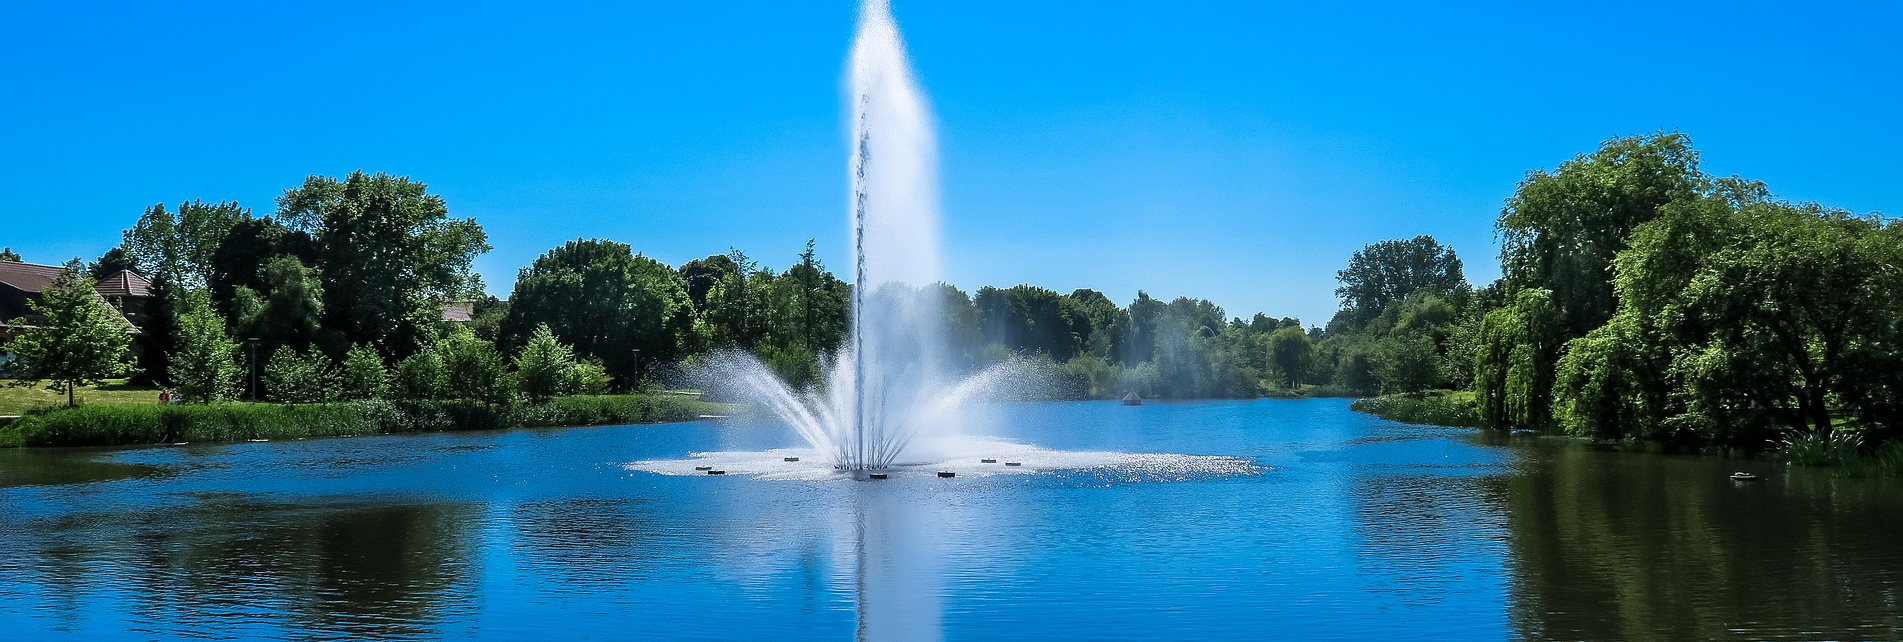 The Lake Doctor - lake management floating fountains Dallas Fort Worth Texas - Lake Management Company - Floating Fountains Aeration Systems Vegetation Control Fish Fish Feeders Installation & Design McKinney Texas